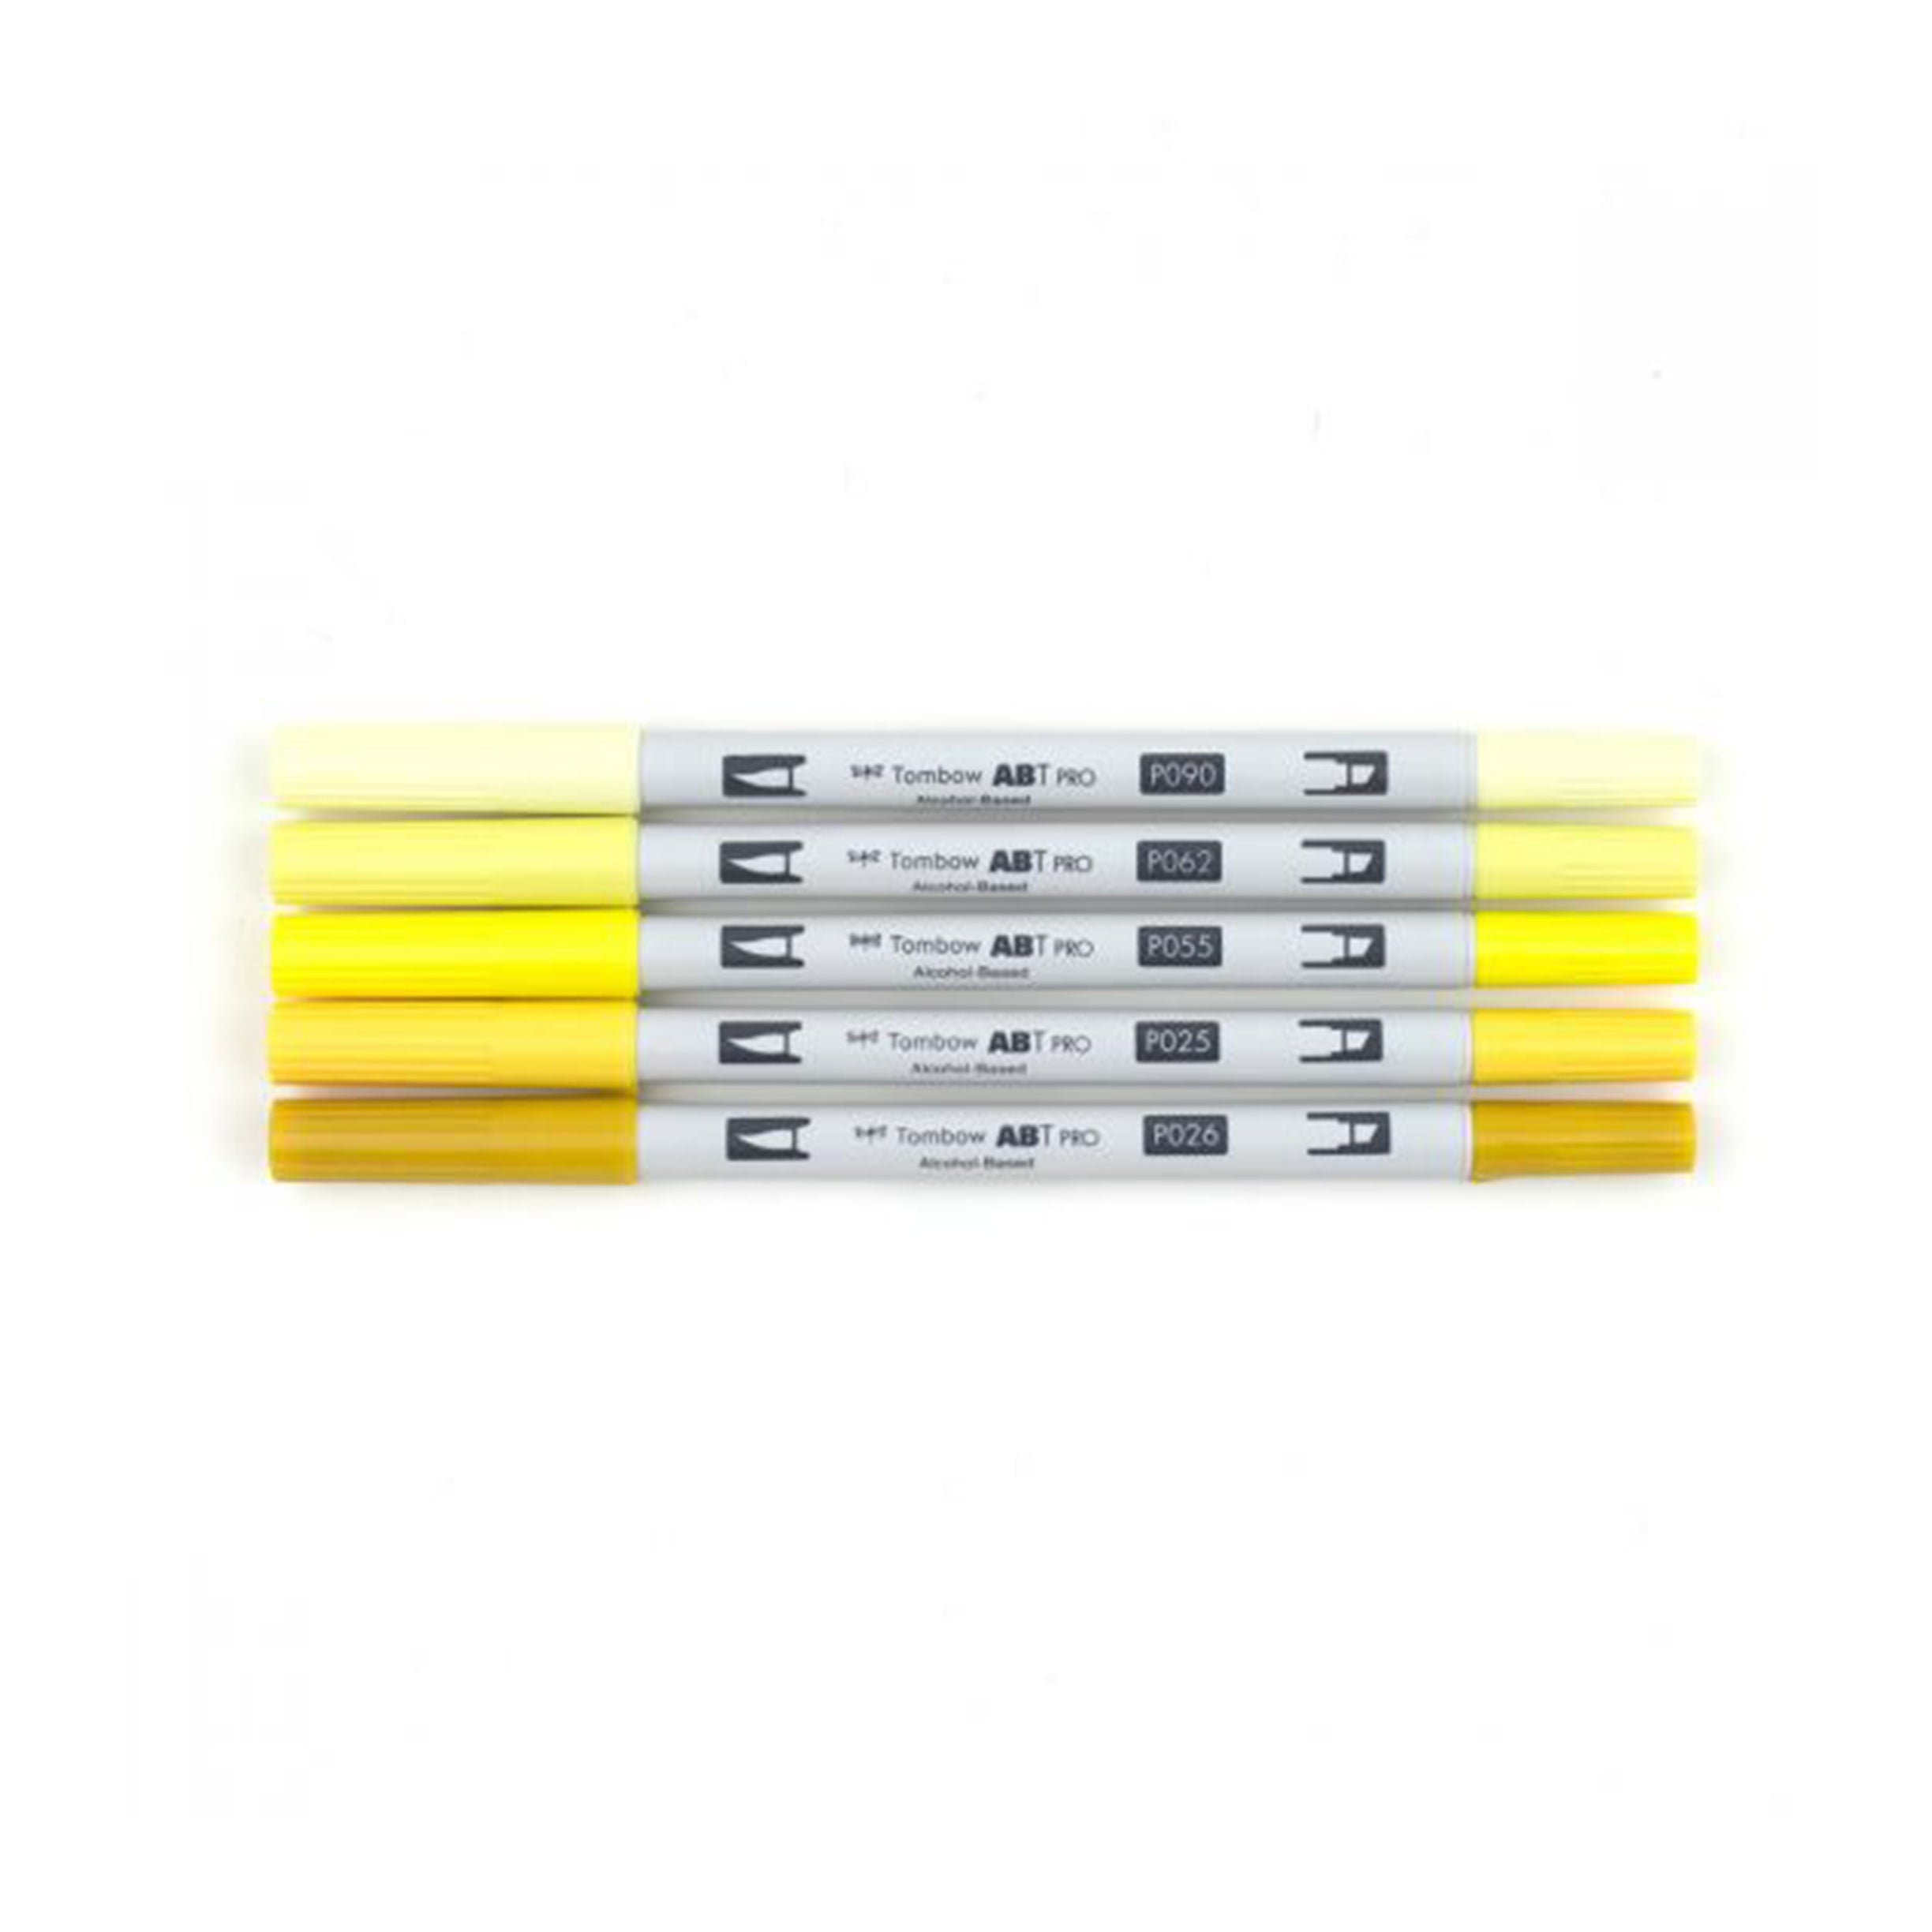 Tombow ABT Pro Alcohol Markers - Yellow Tones, Set of 5